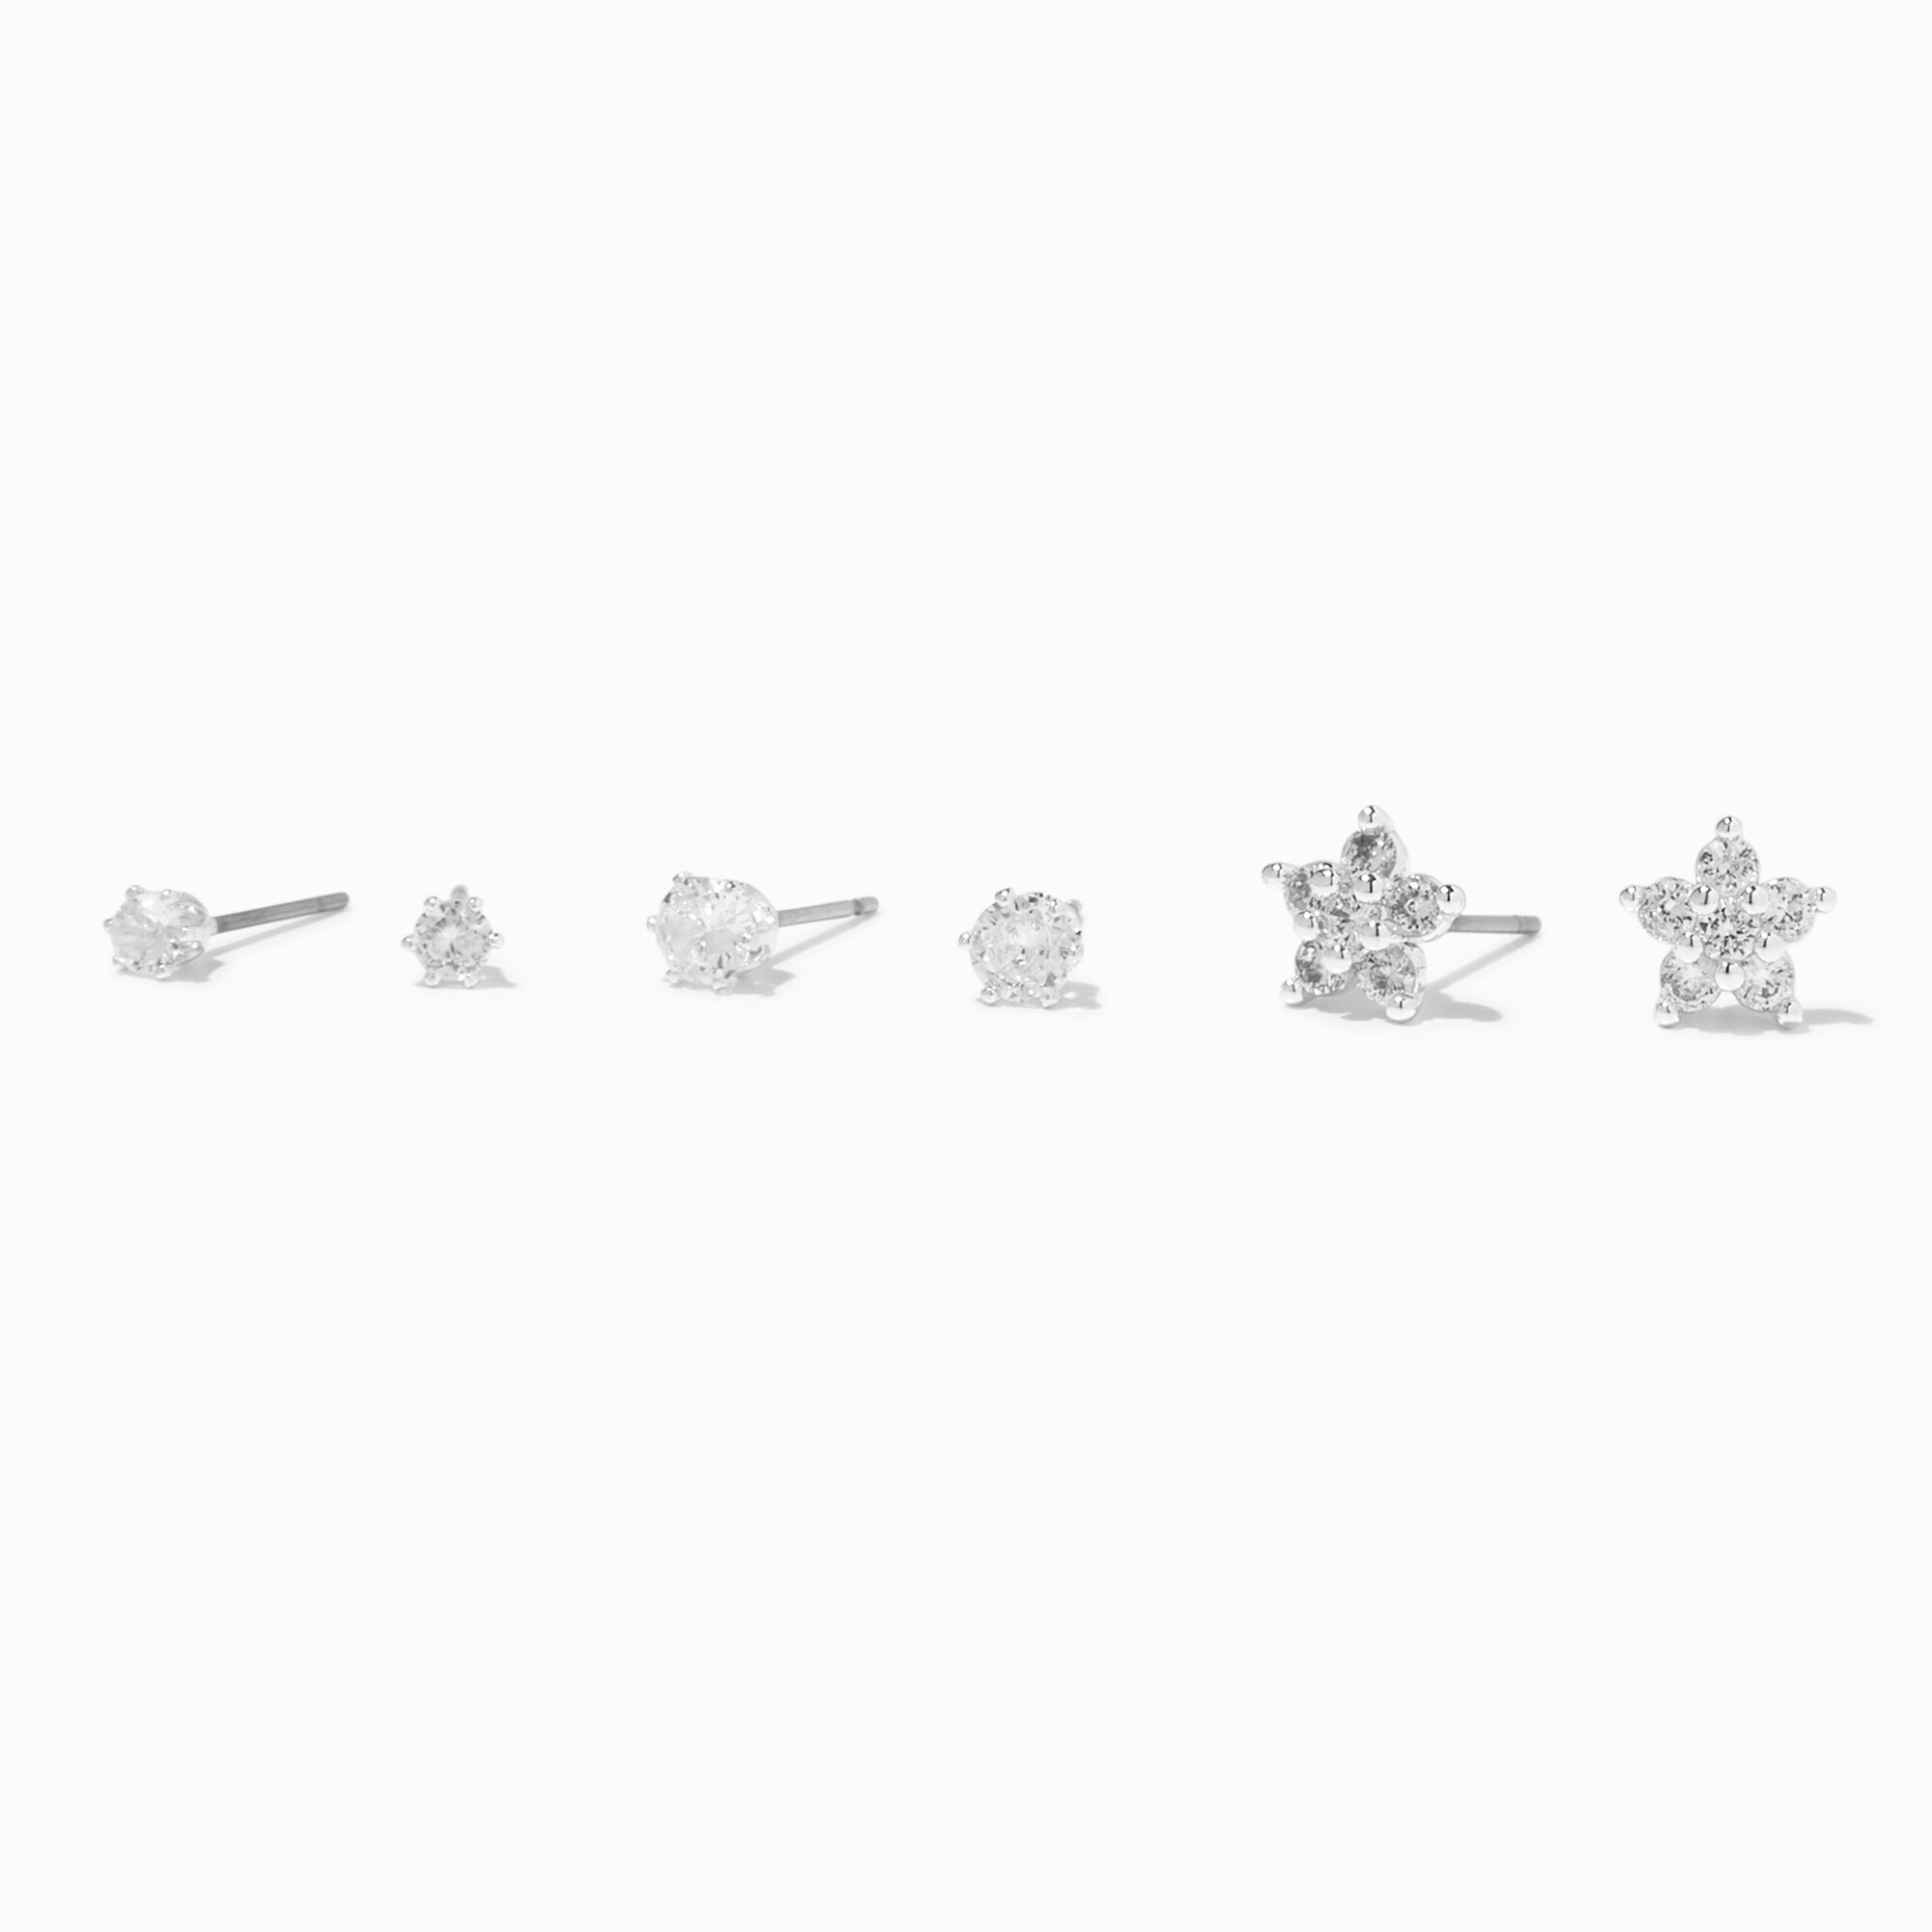 View Claires Tone Cubic Zirconia Flower Stud Earrings 3 Pack Silver information